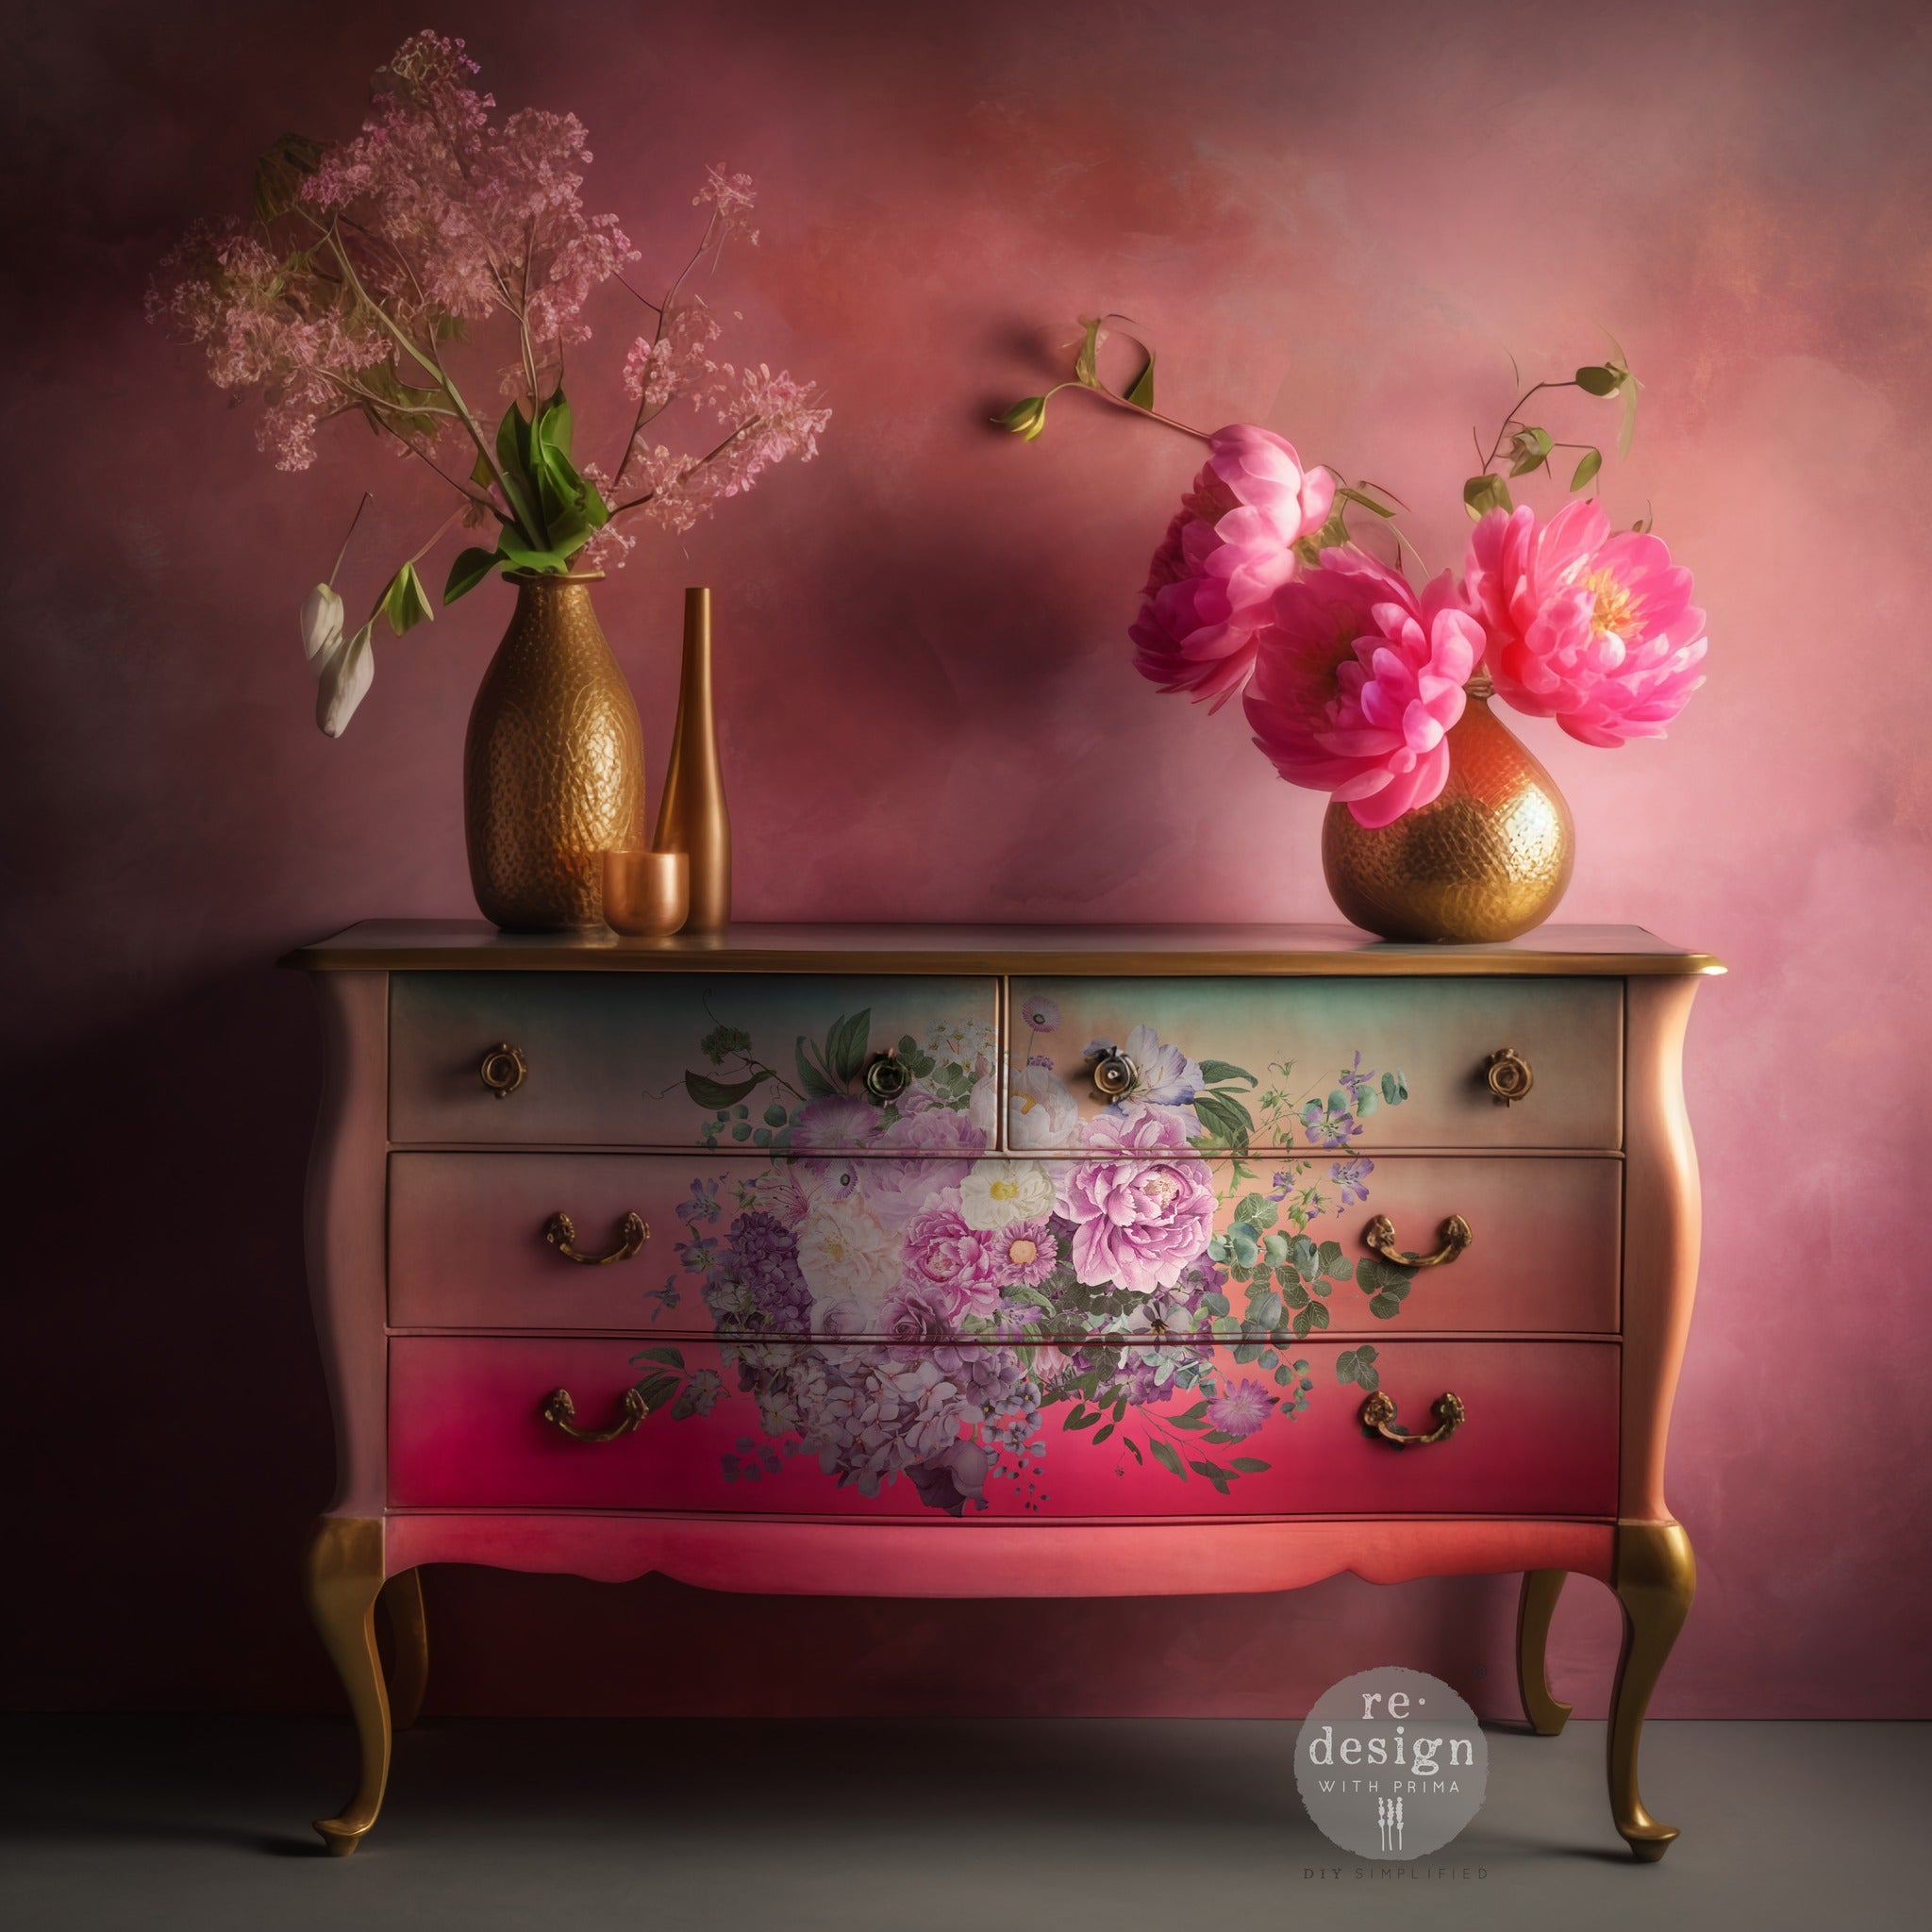 A vintage 4 drawer dresser is painted an ombre blend of coral pink and light green and features ReDesign with Prima's Kacha Morning Purple in the center of the drawers.